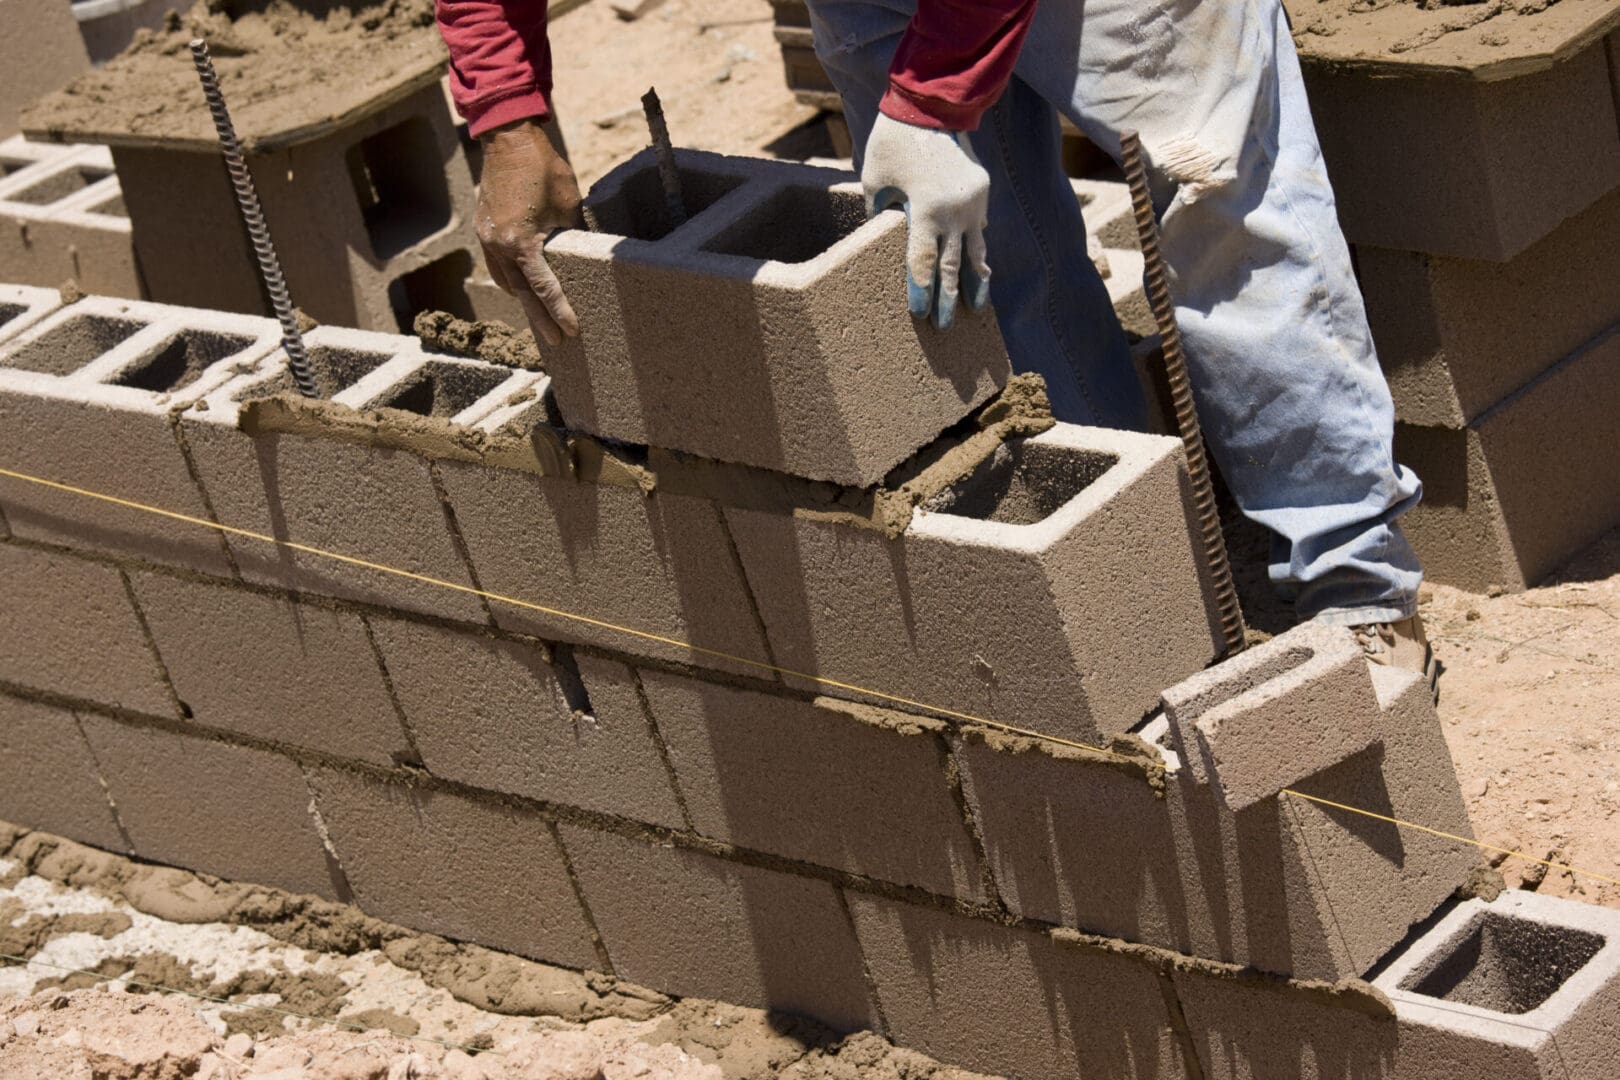 A man building a brick wall with cement blocks.